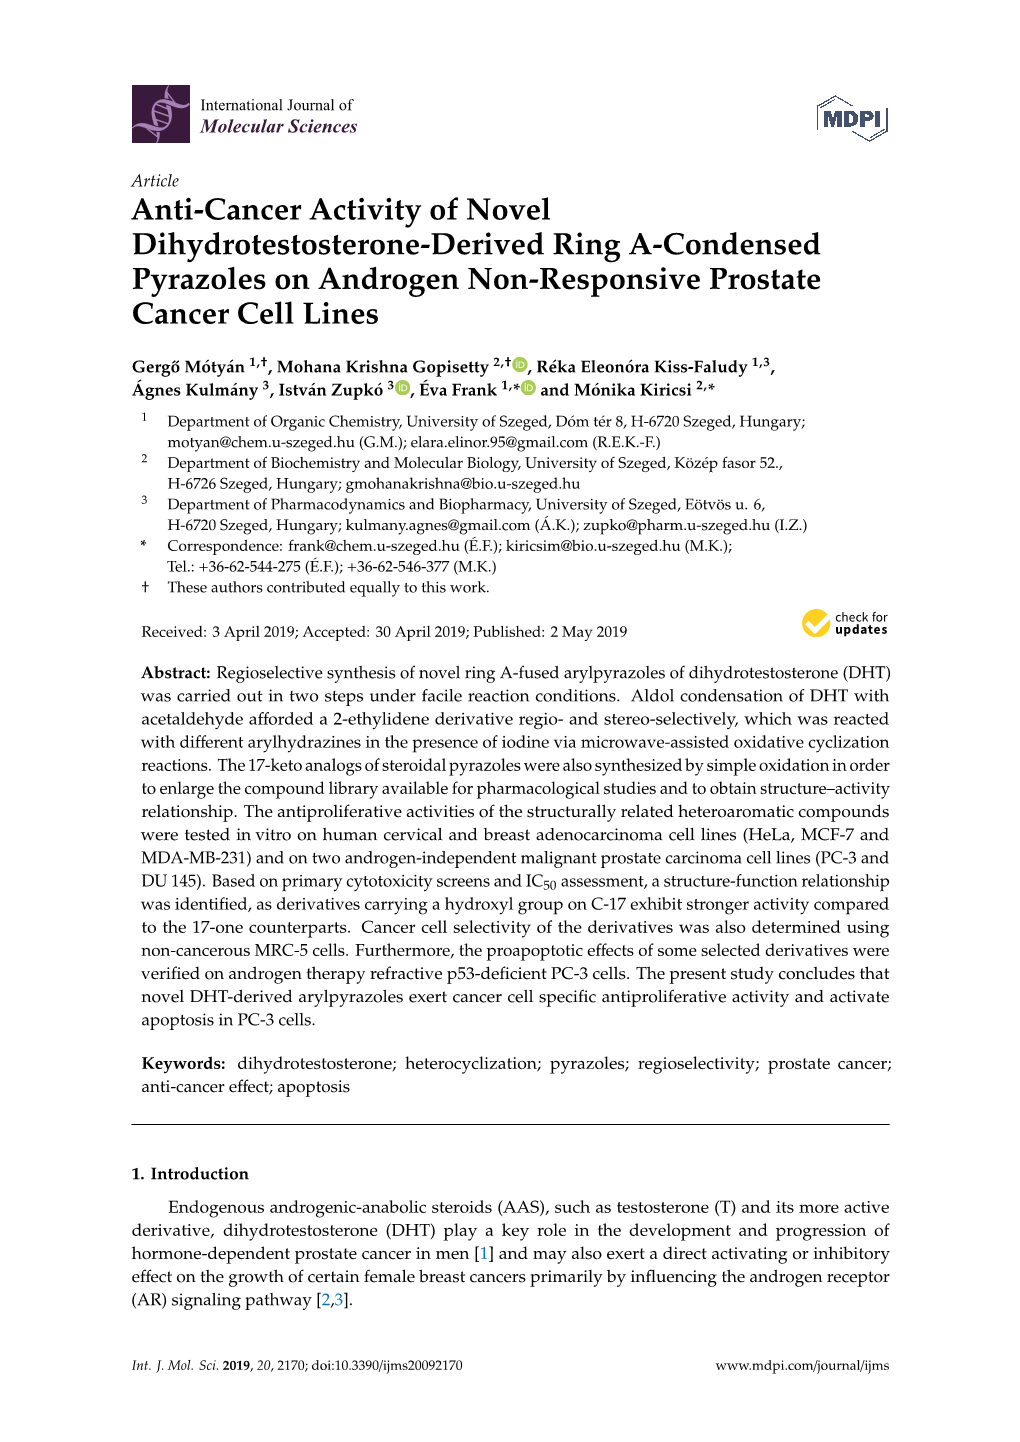 Anti-Cancer Activity of Novel Dihydrotestosterone-Derived Ring A-Condensed Pyrazoles on Androgen Non-Responsive Prostate Cancer Cell Lines